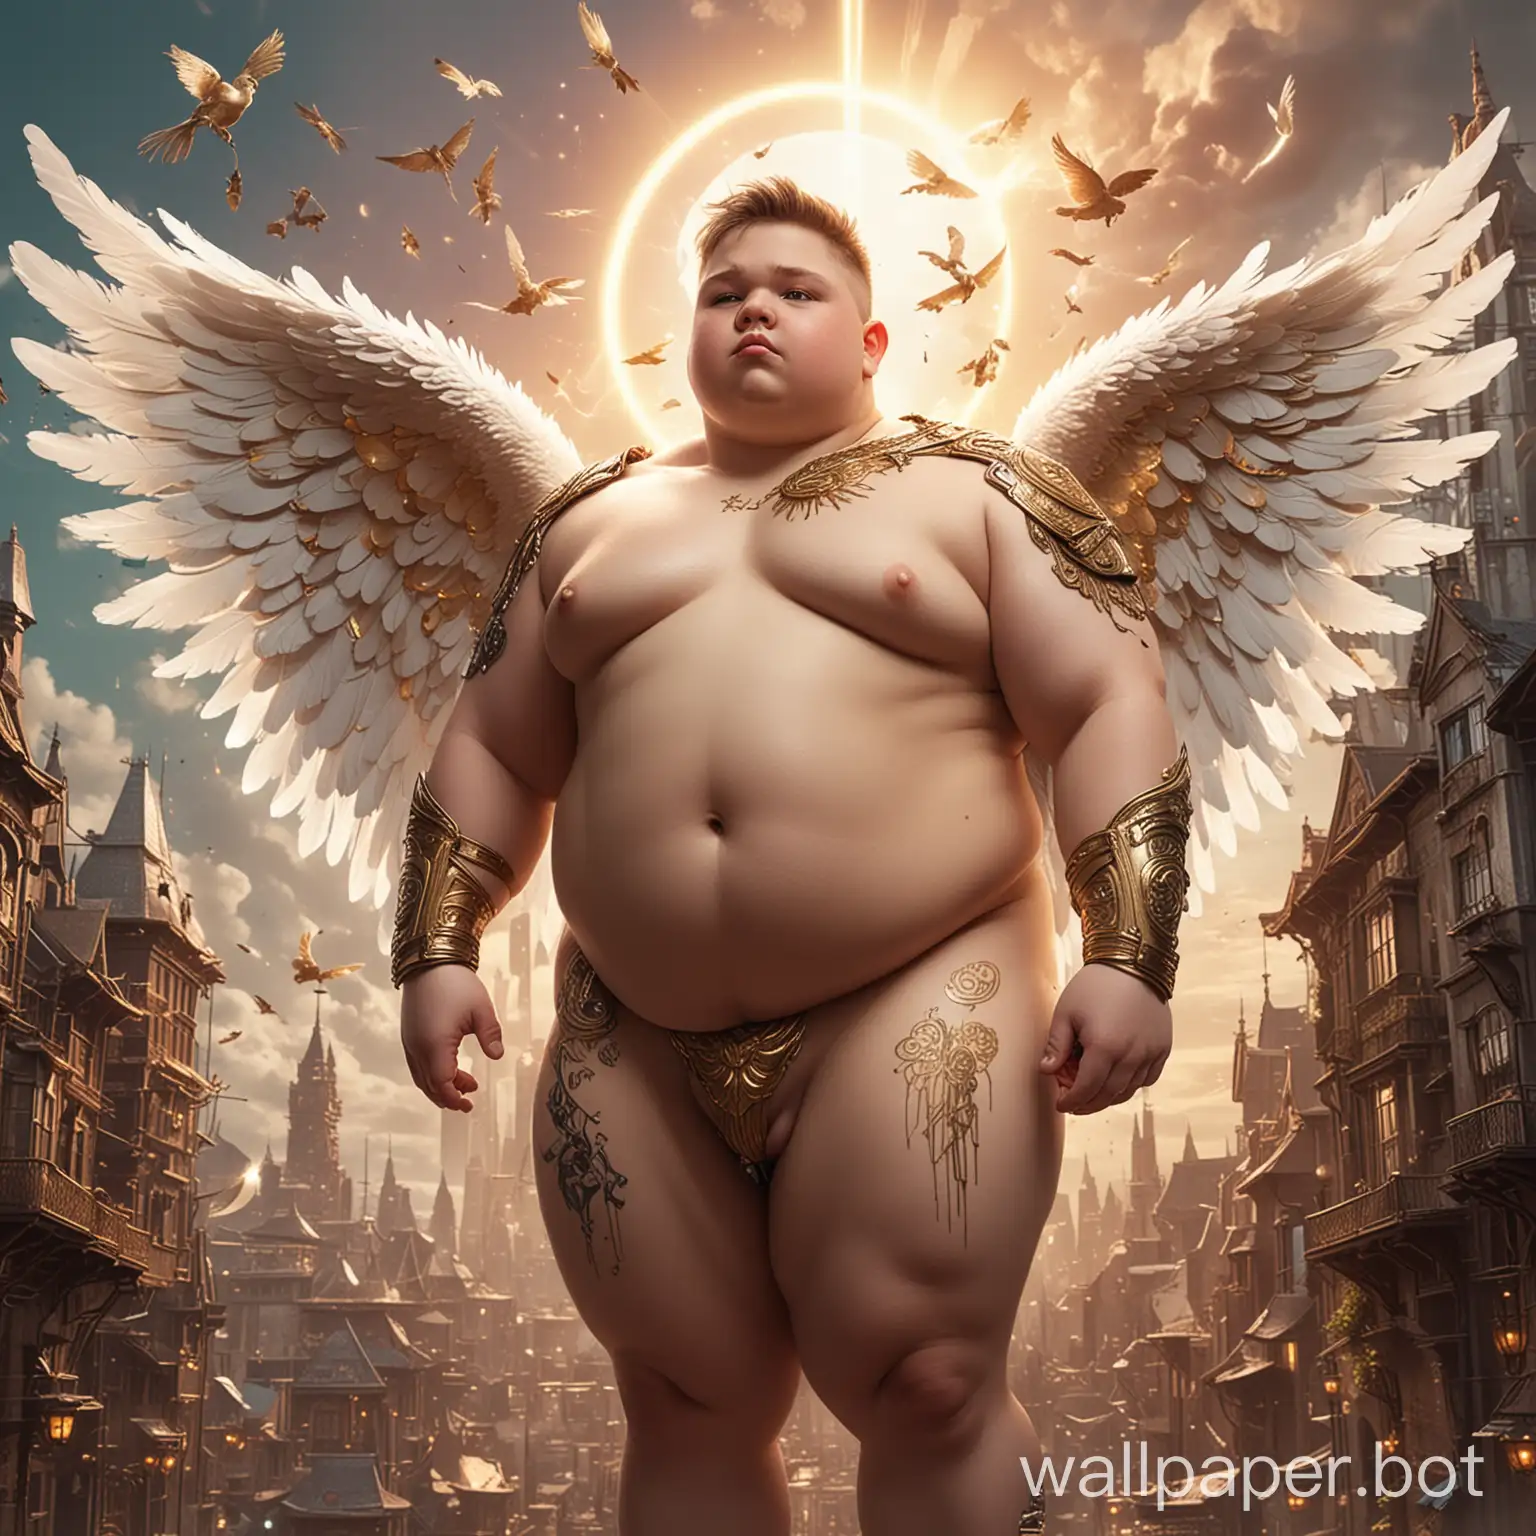 Sci-fi future chubby young warrior cherub angel boy with exposed massive chubby chest with large nipples and round obese belly wearing nothing with iridescent wings with gold tipped feathers and magical runic tattoos that glow, hovering in flight and glowing with angelic power holding an aetheric magical staff, posing in front of a magical futuristic city landscape